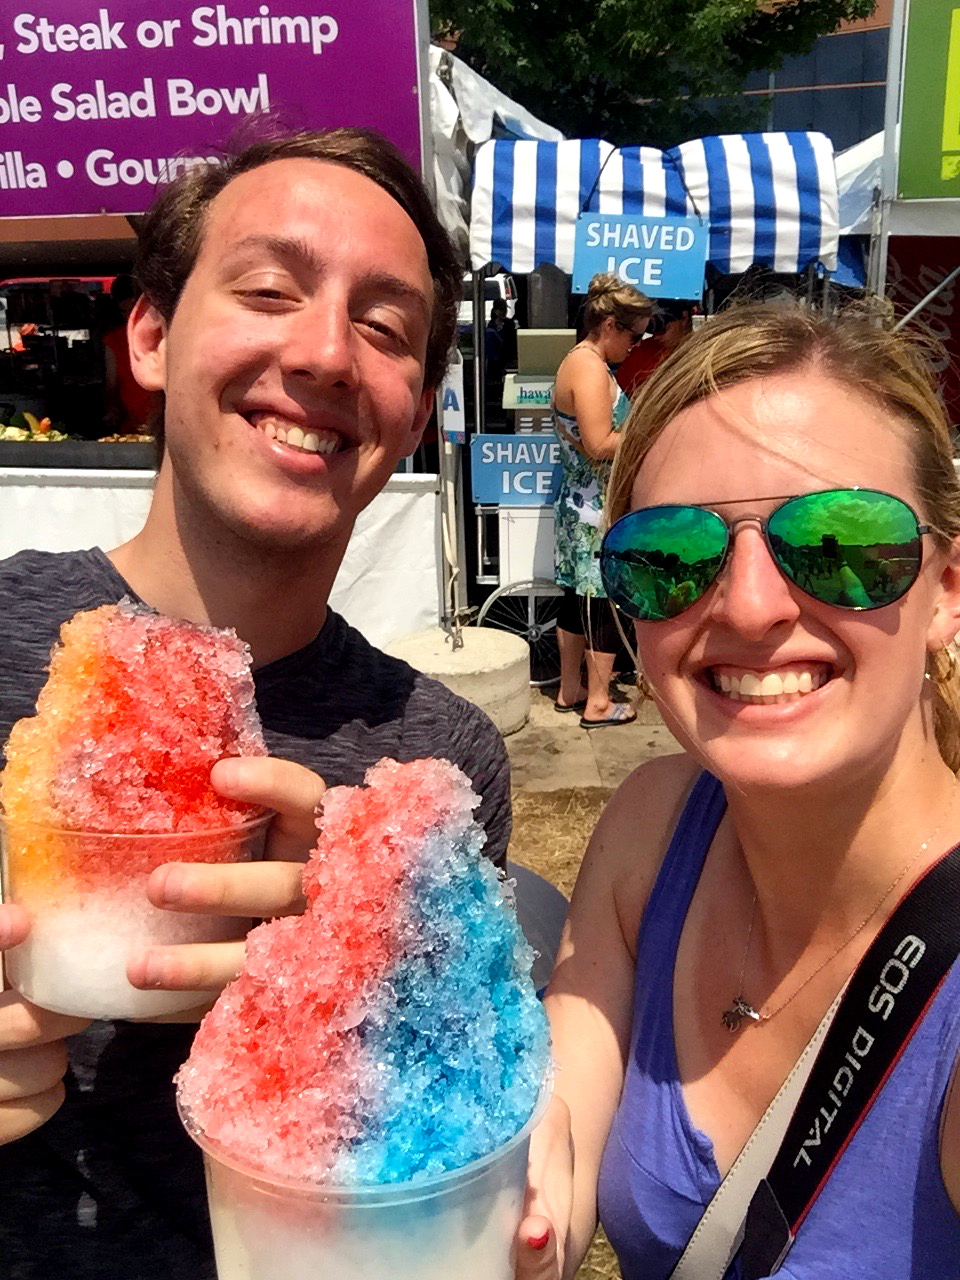 We love shaved ice :)